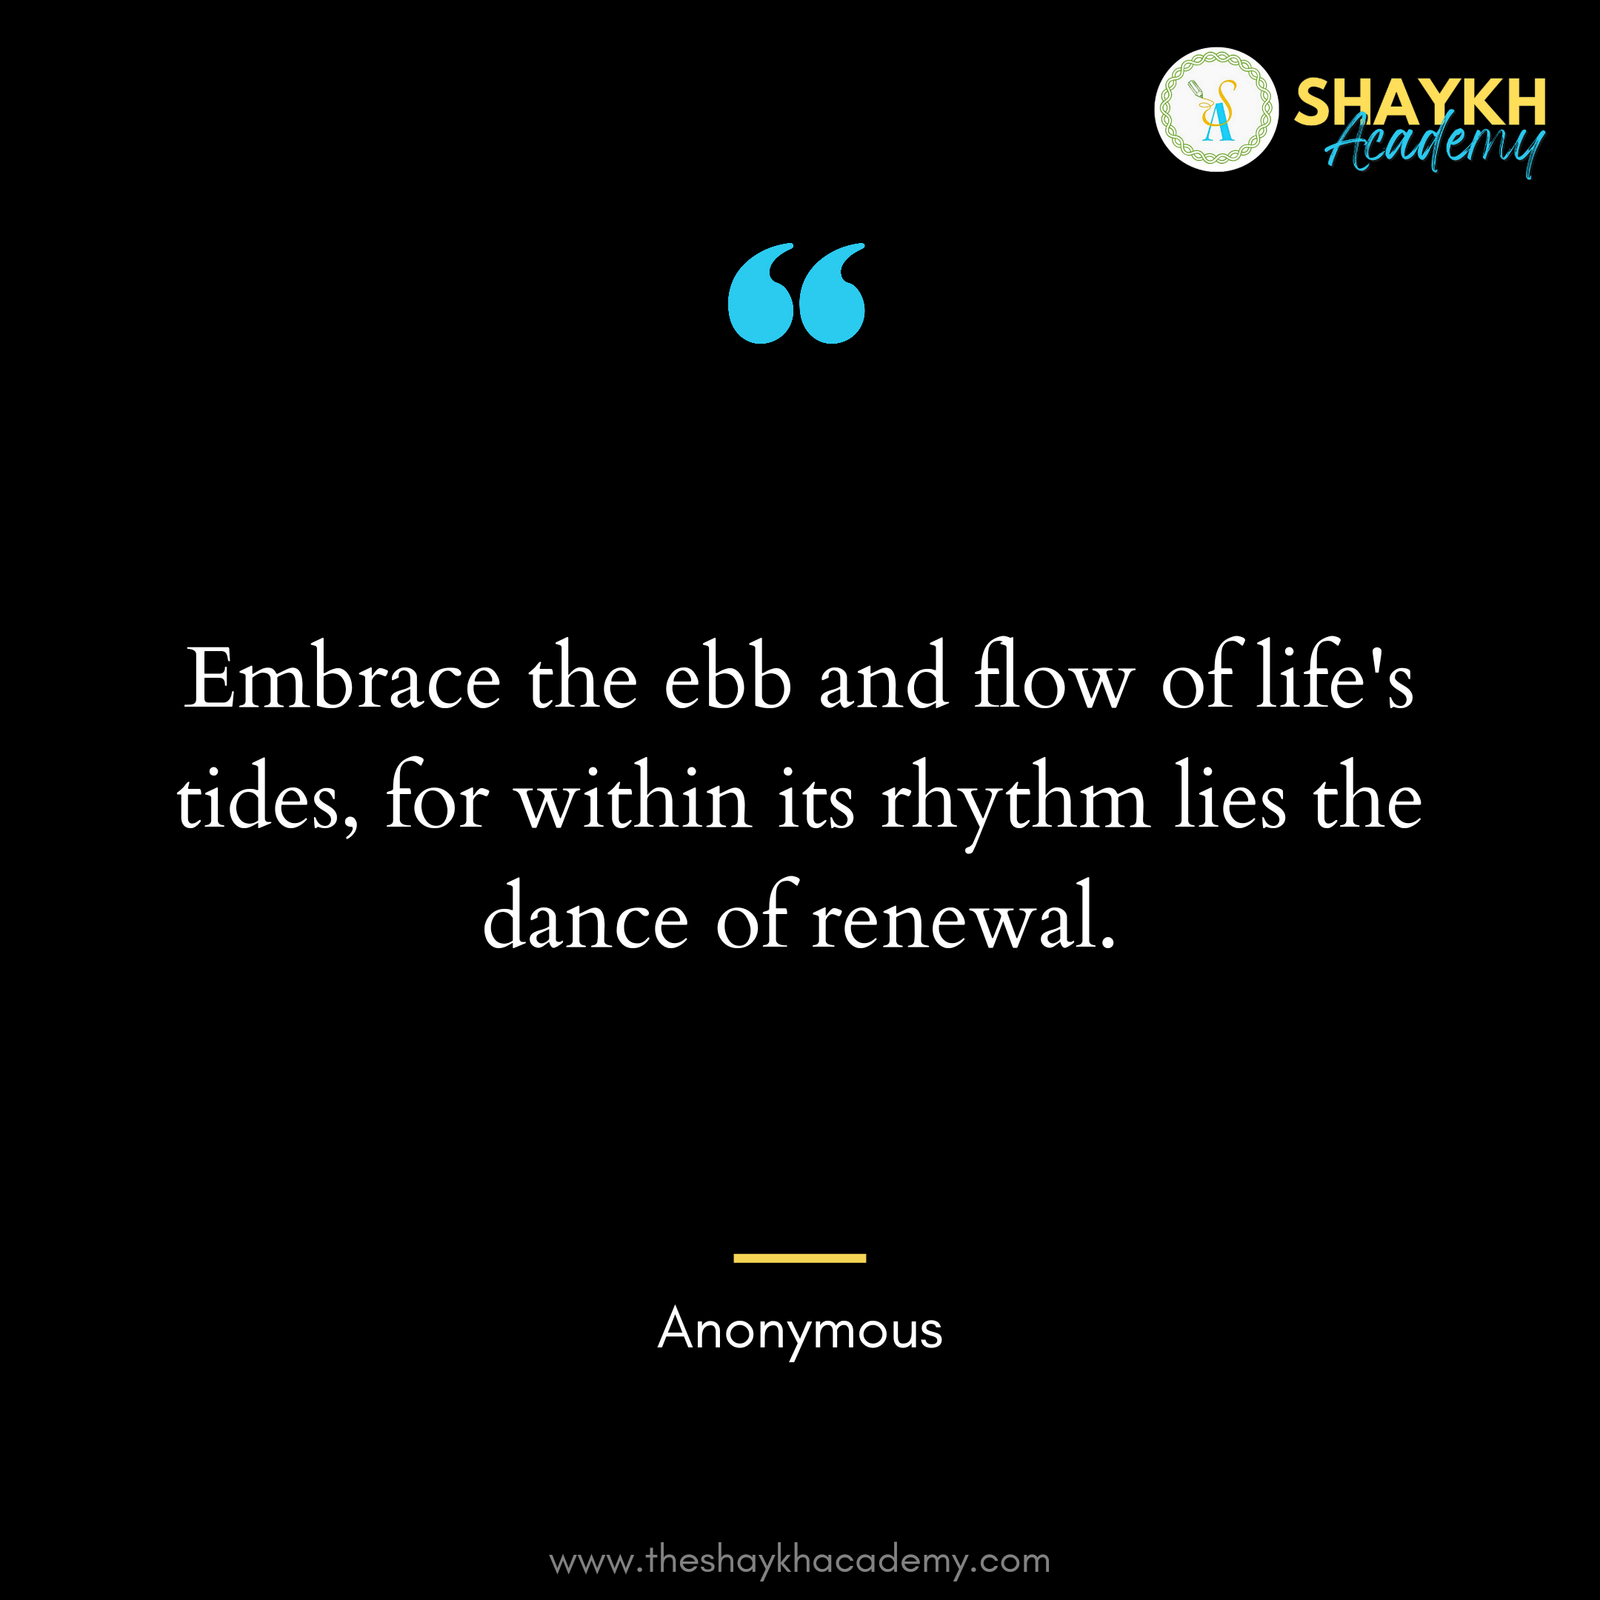 Embrace the ebb and flow of life's tides, for within its rhythm lies the dance of renewal.